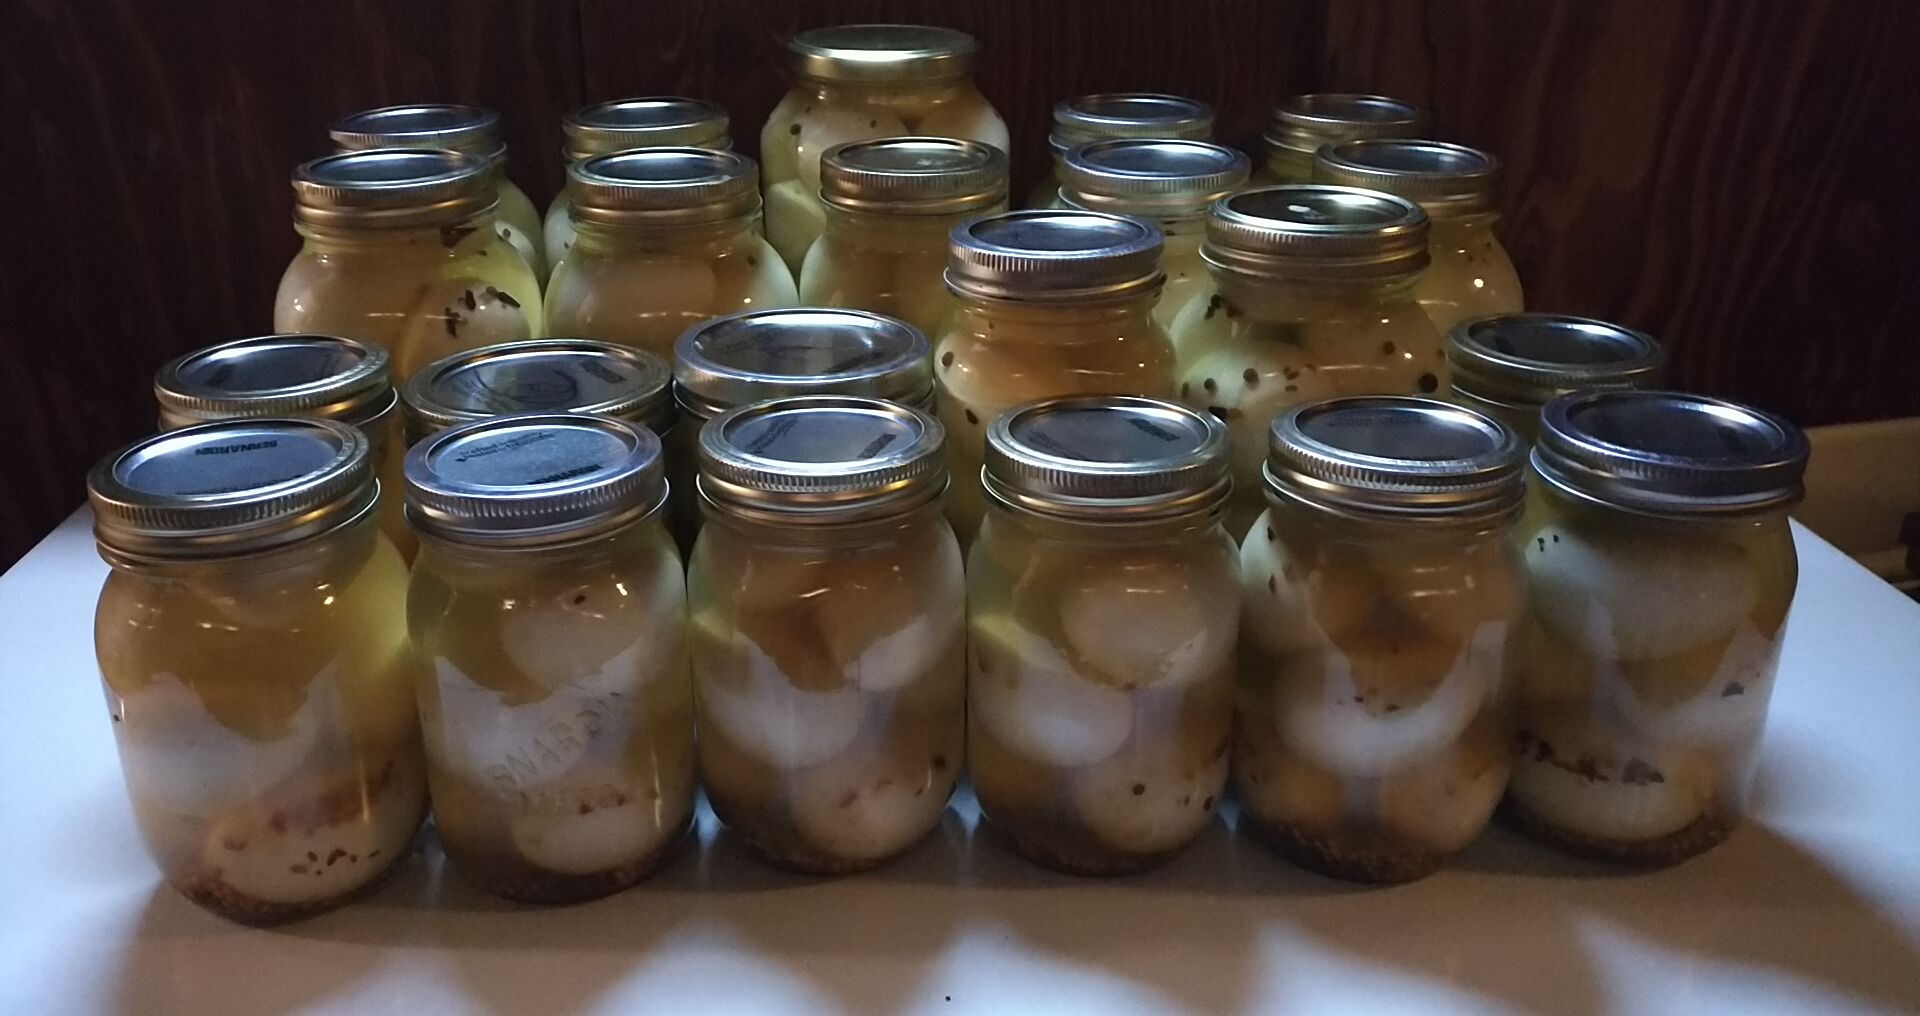 This is what 22 jars, totalling 229 pickled eggs. looks like